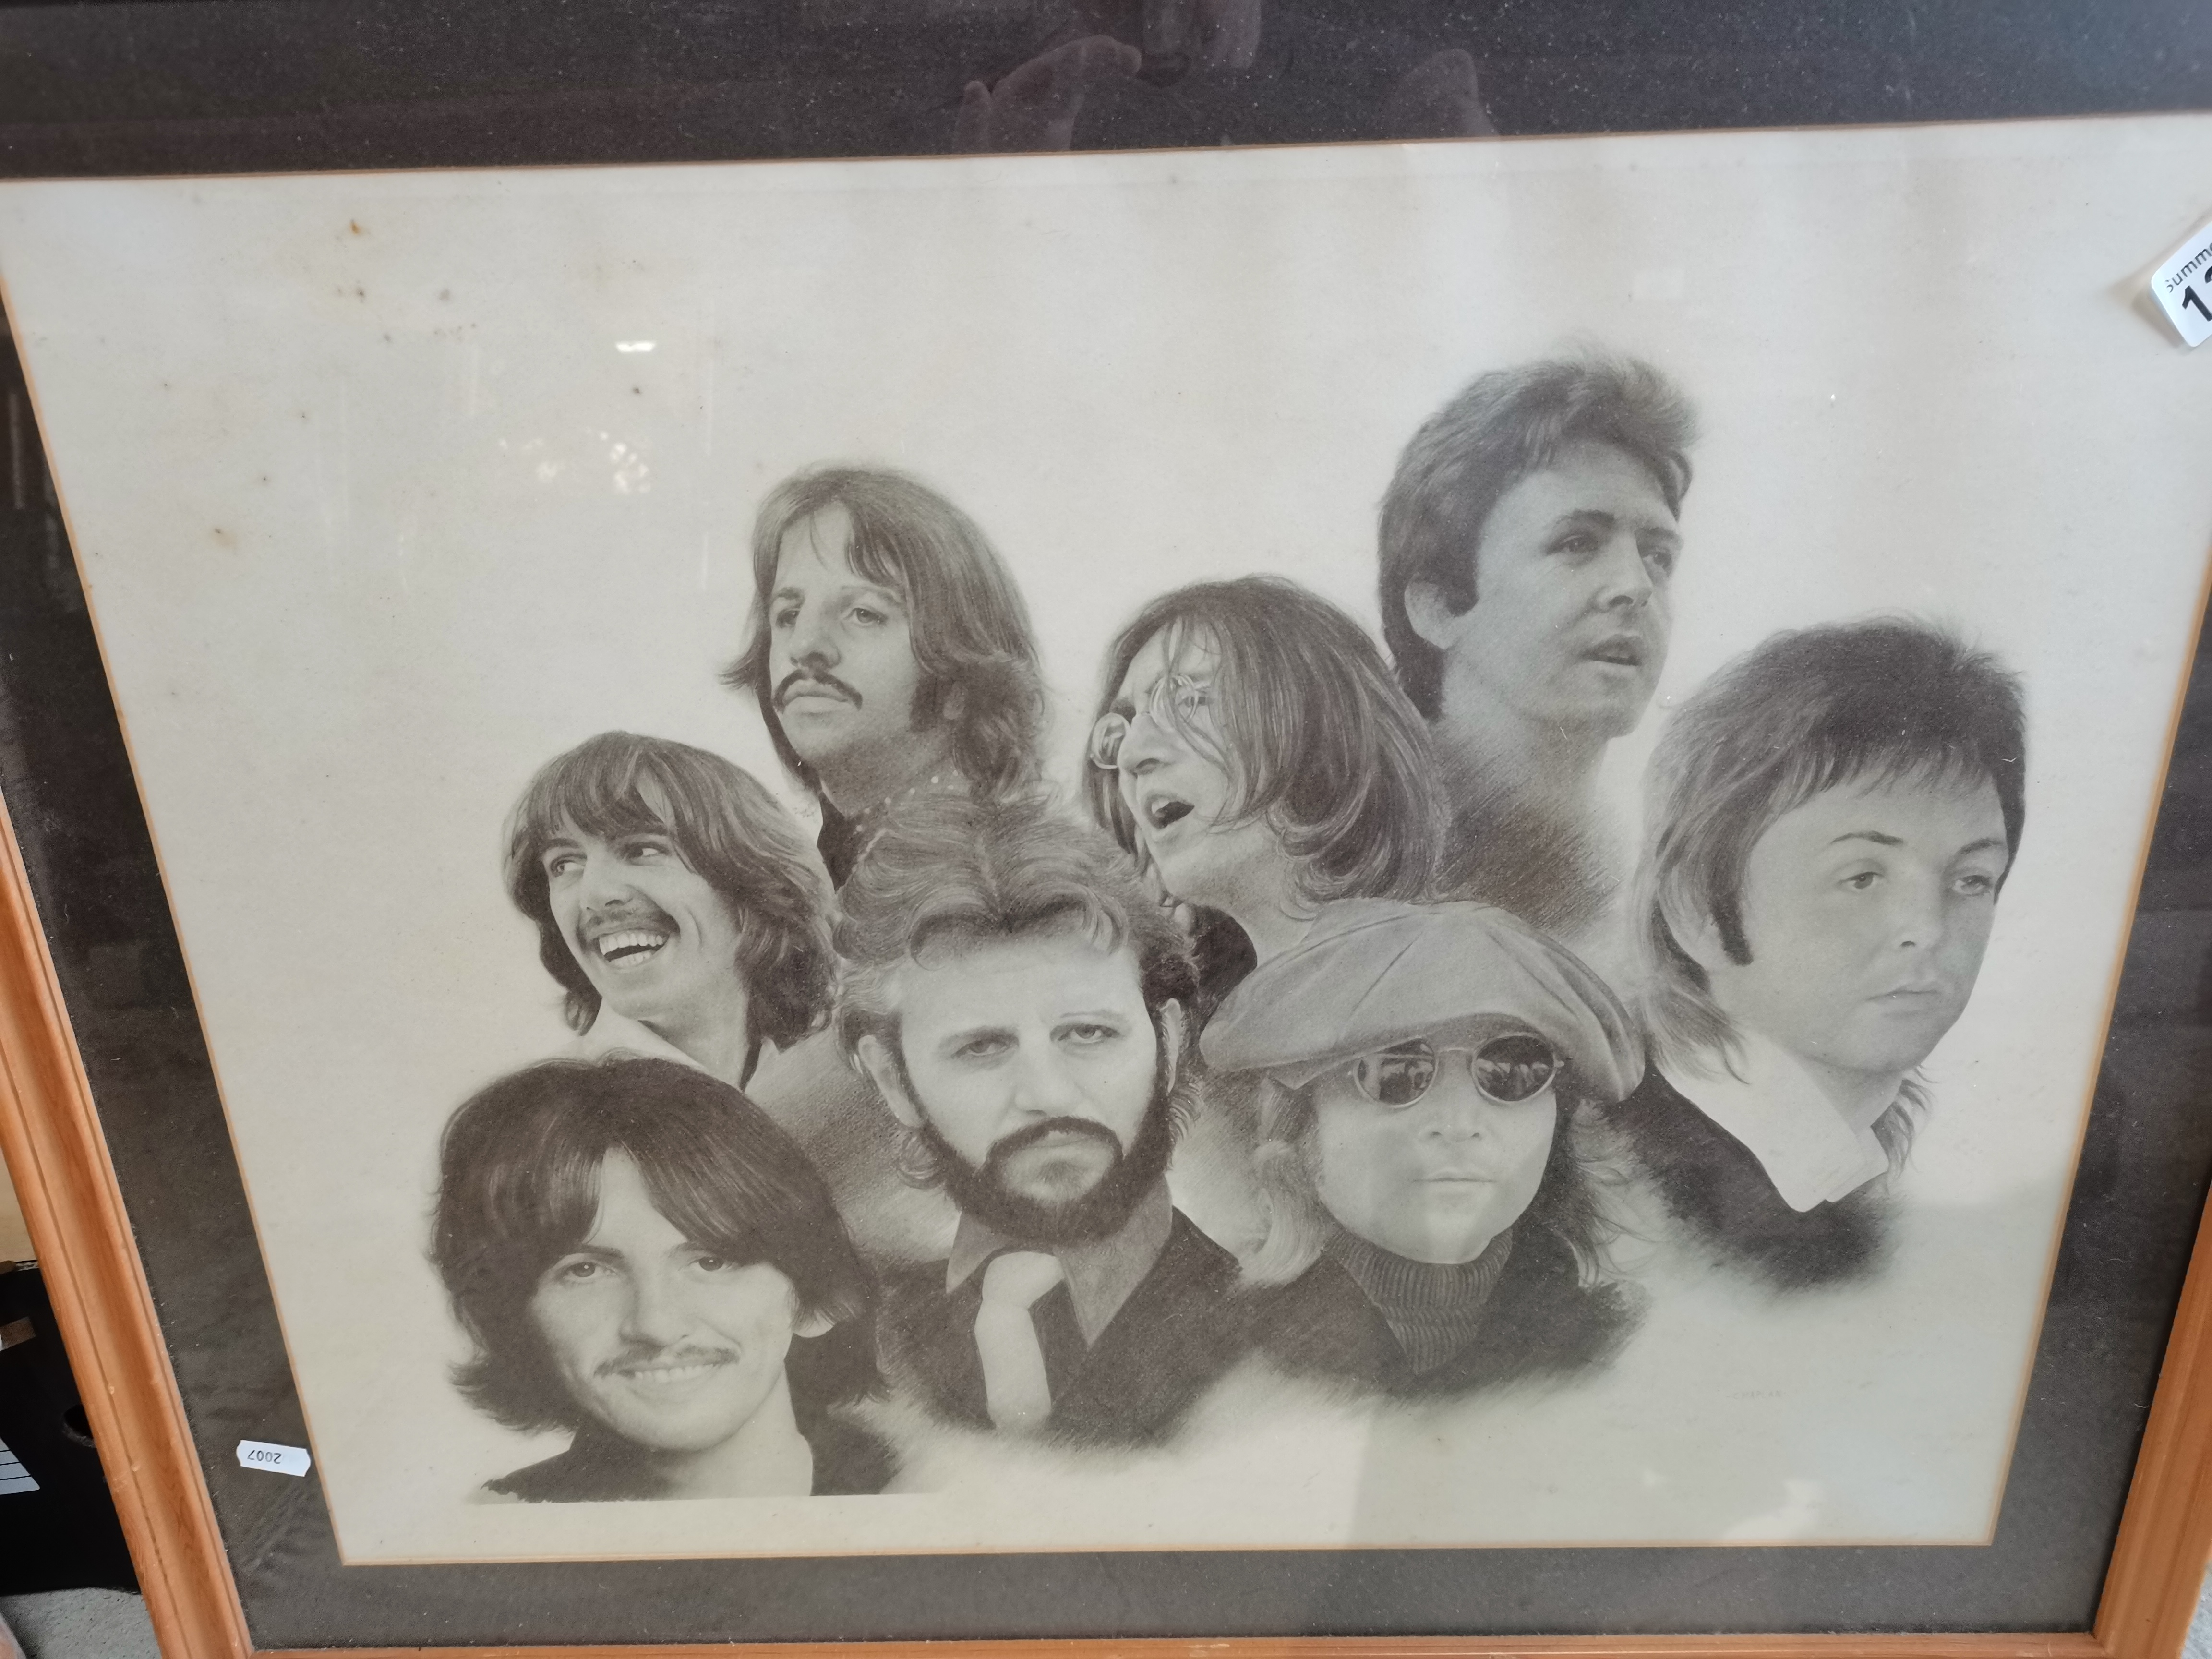 Beatles picture - Image 2 of 2